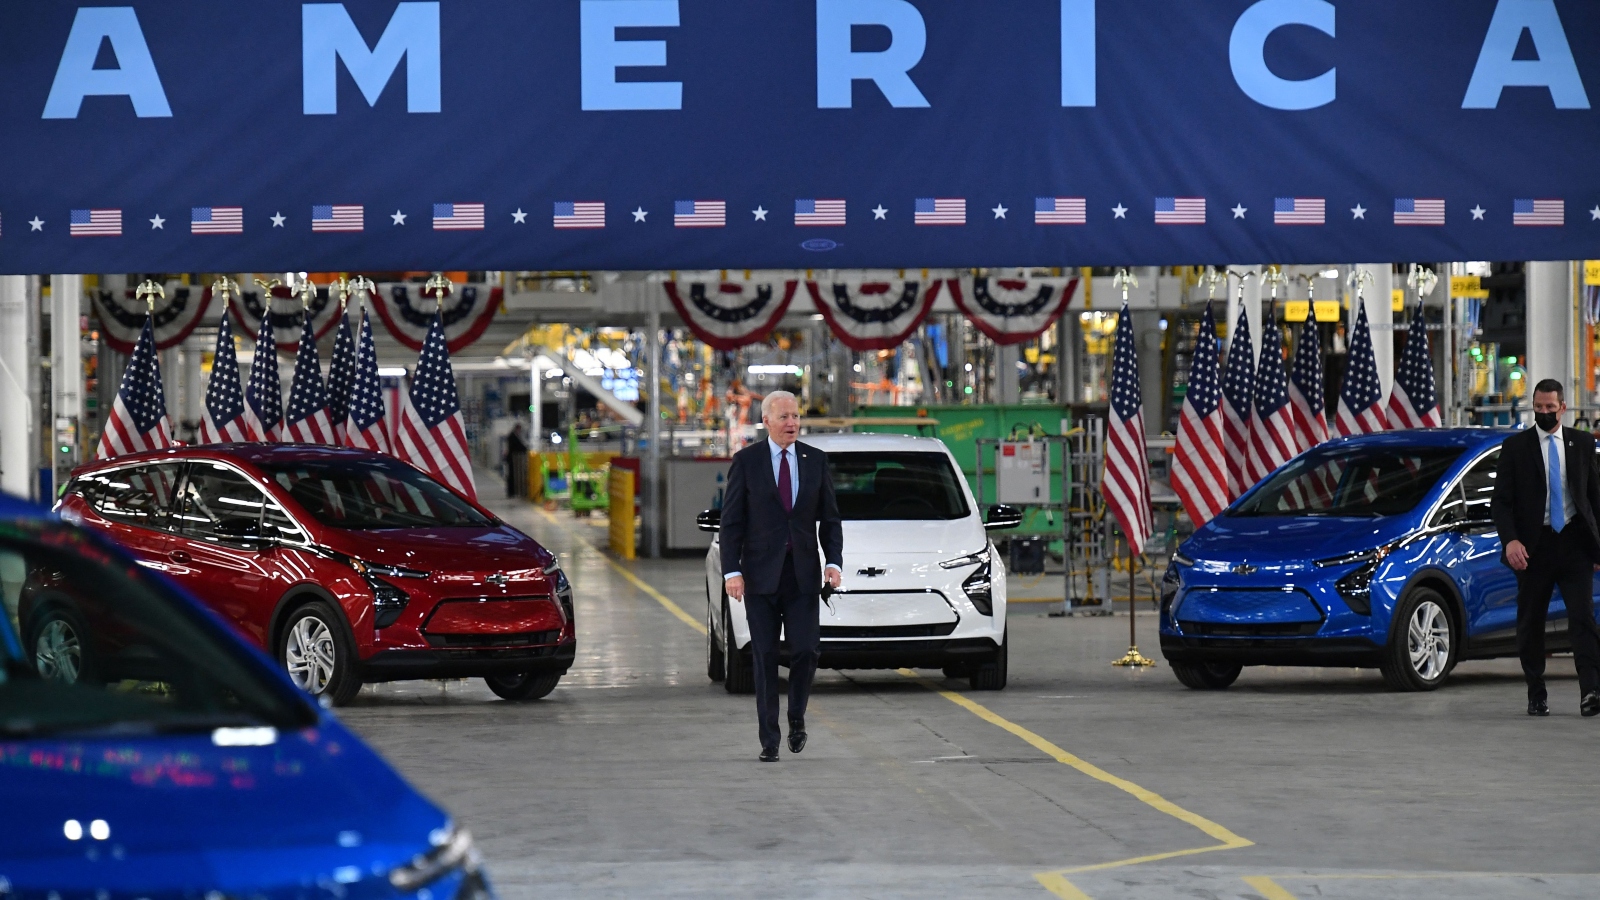 President Joe Biden walks near Chevy vehicles as he arrives to deliver remarks during a visit to a General Motors electric vehicle assembly plant in Detroit, Michigan.